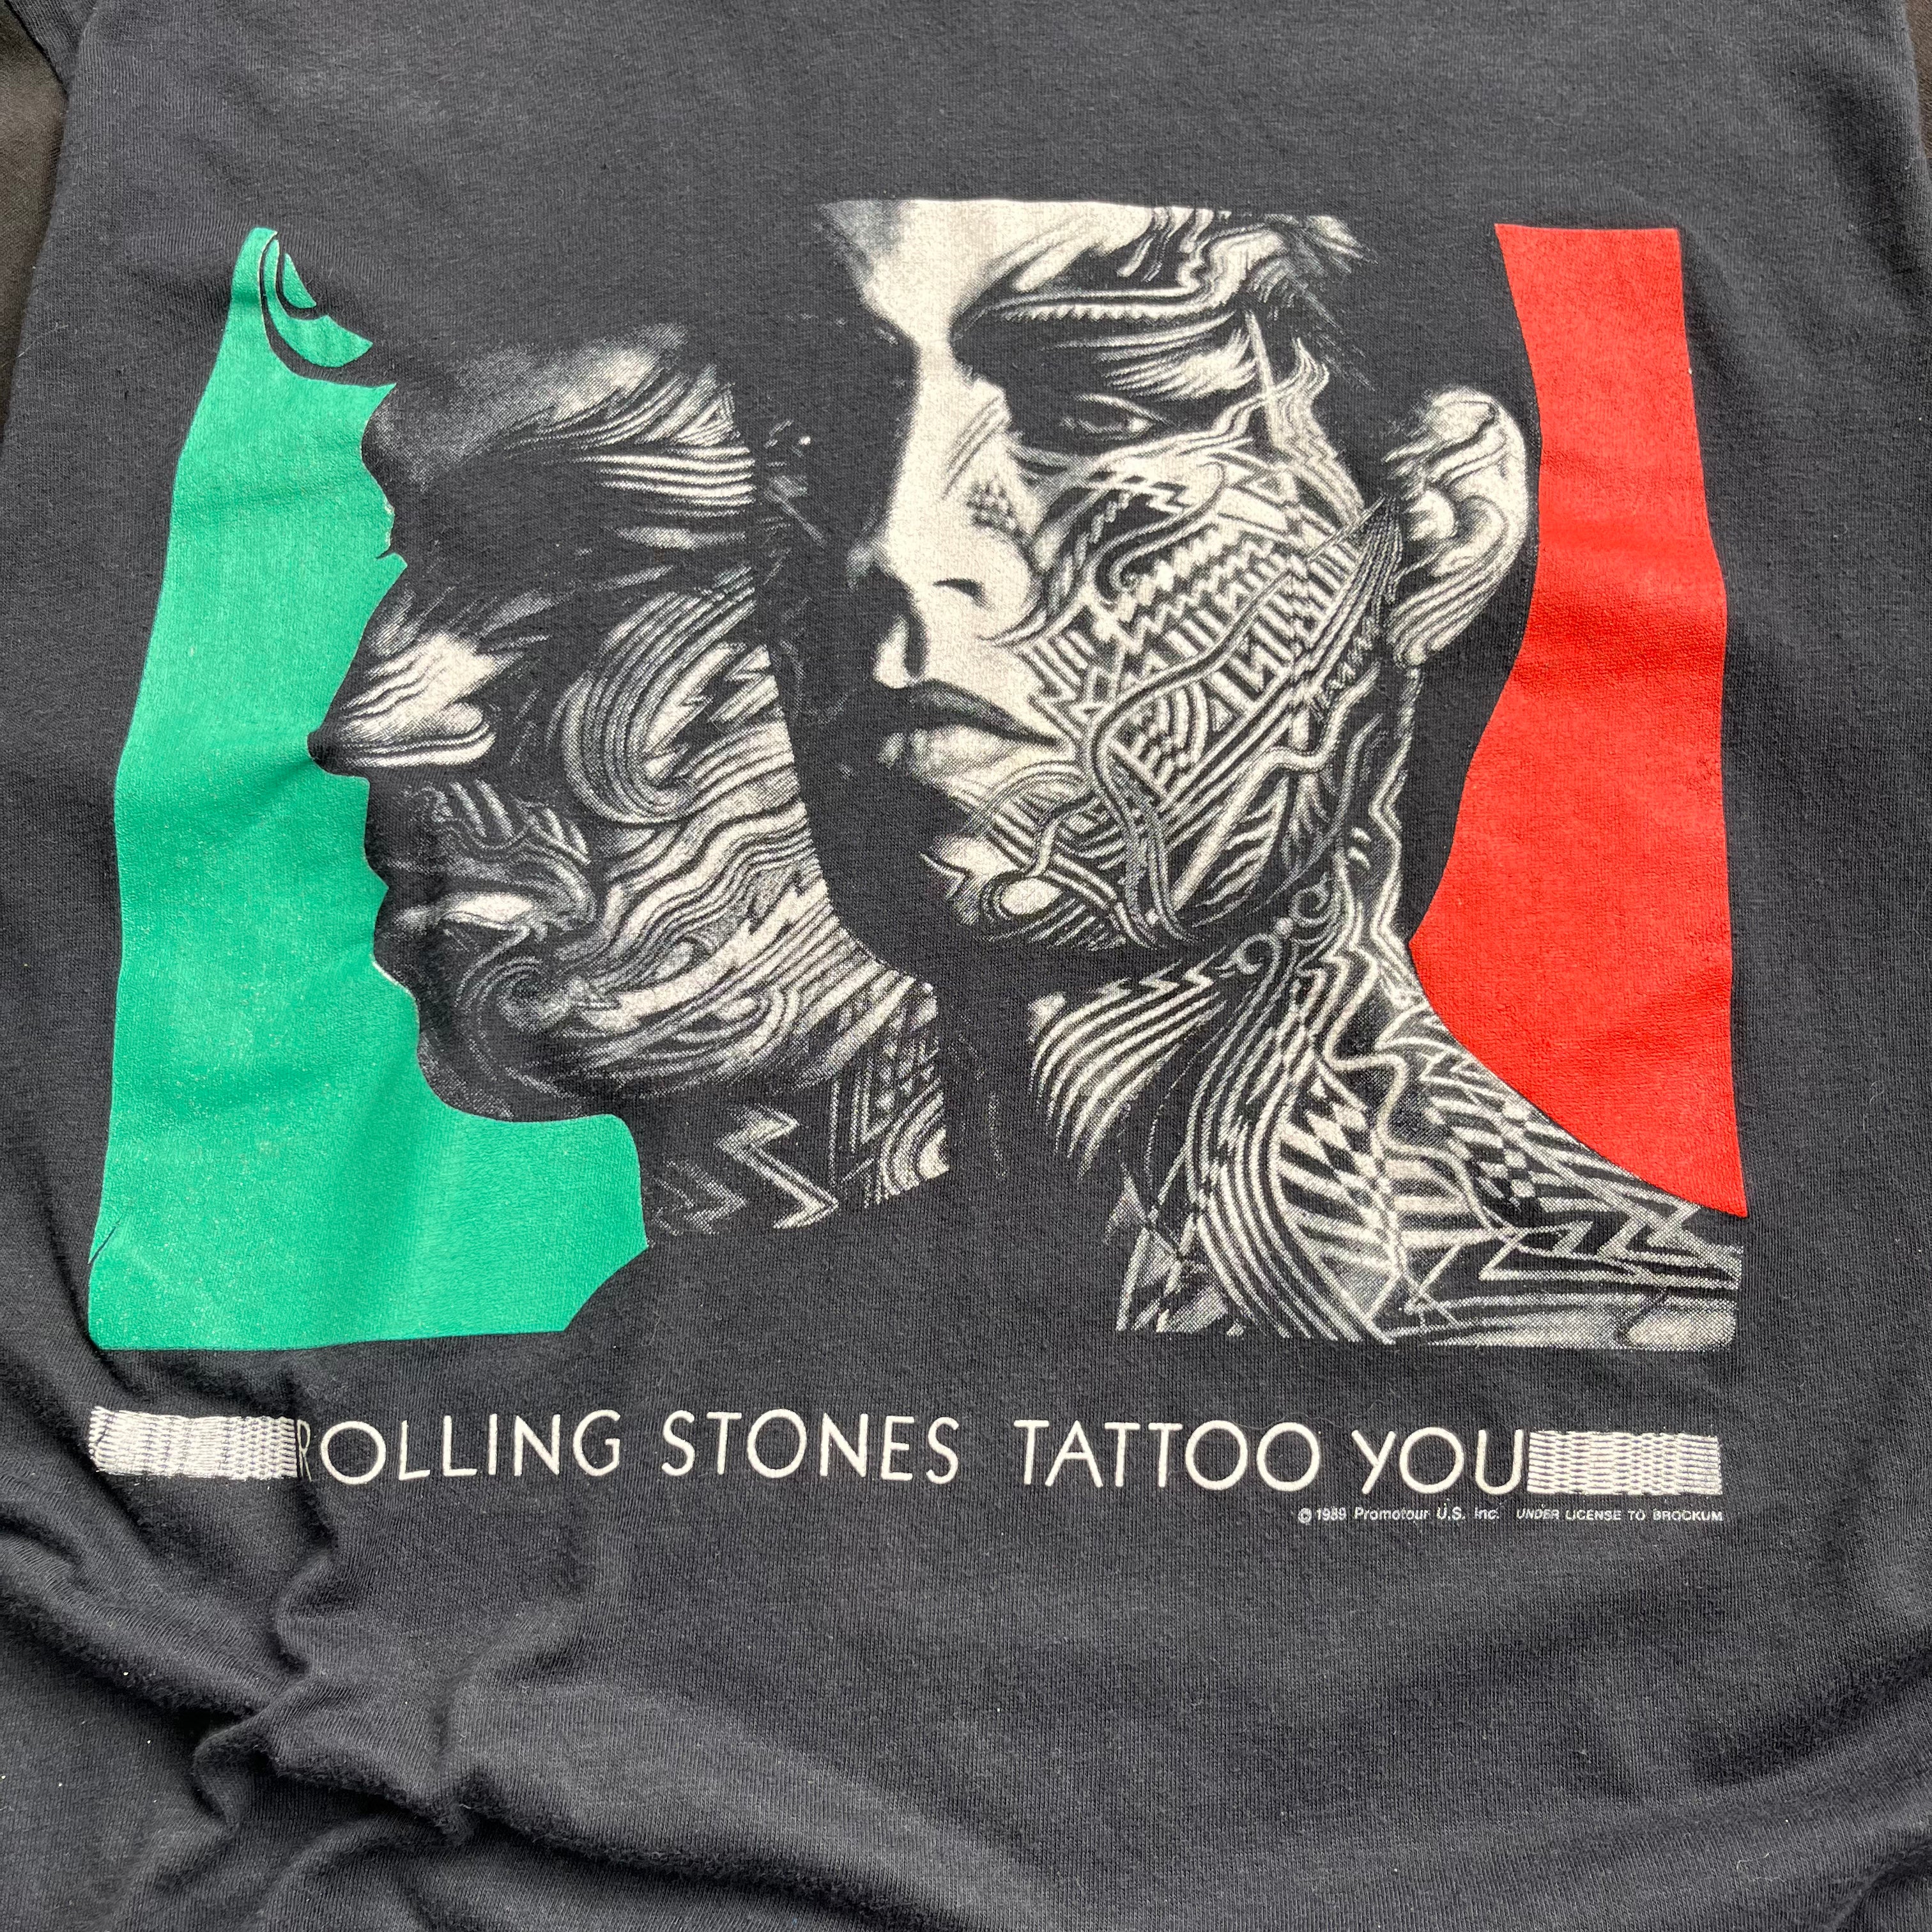 1989 Rolling Stones Tattoo You T-Shirt Size XL